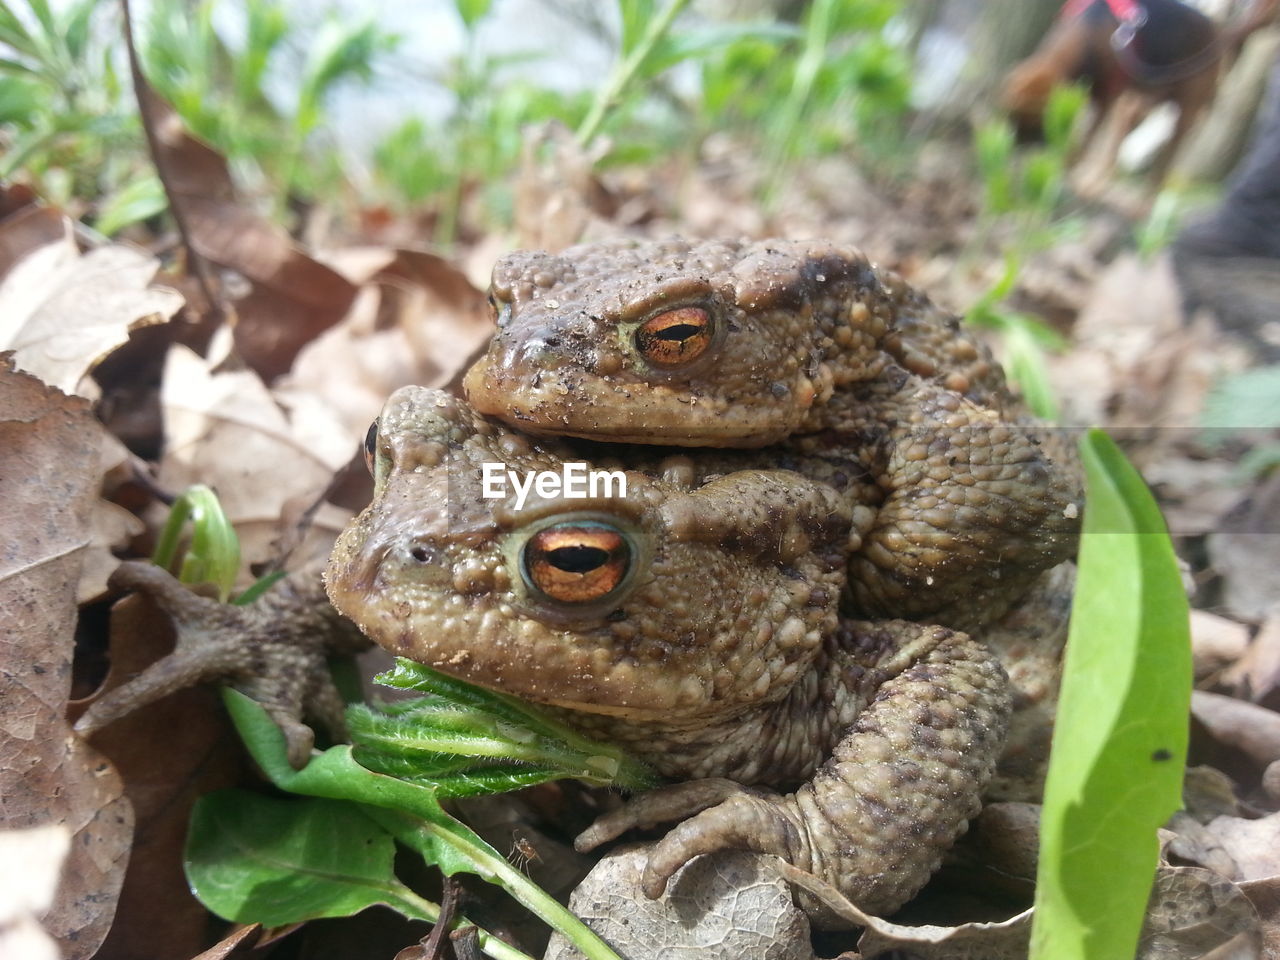 Toads mating on field